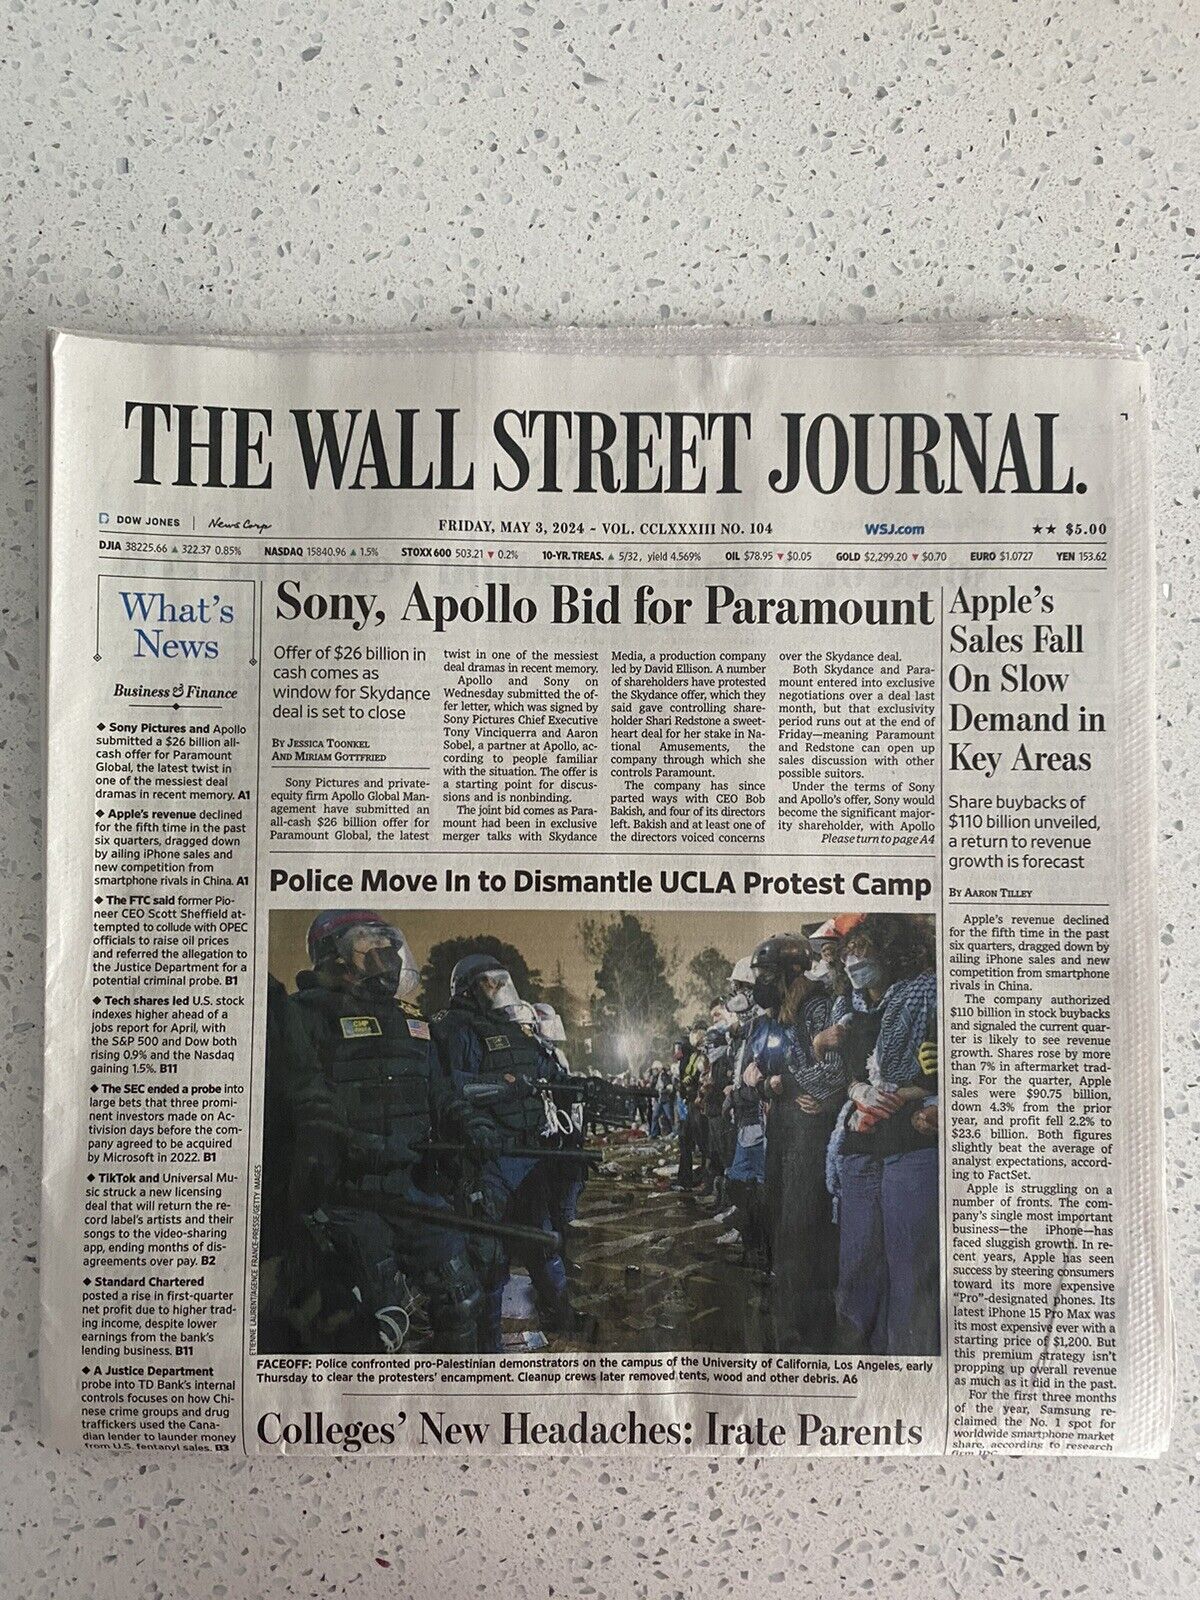 The Wall Street Journal Friday, May 3, 2024 Complete Print Newspaper (NEW)